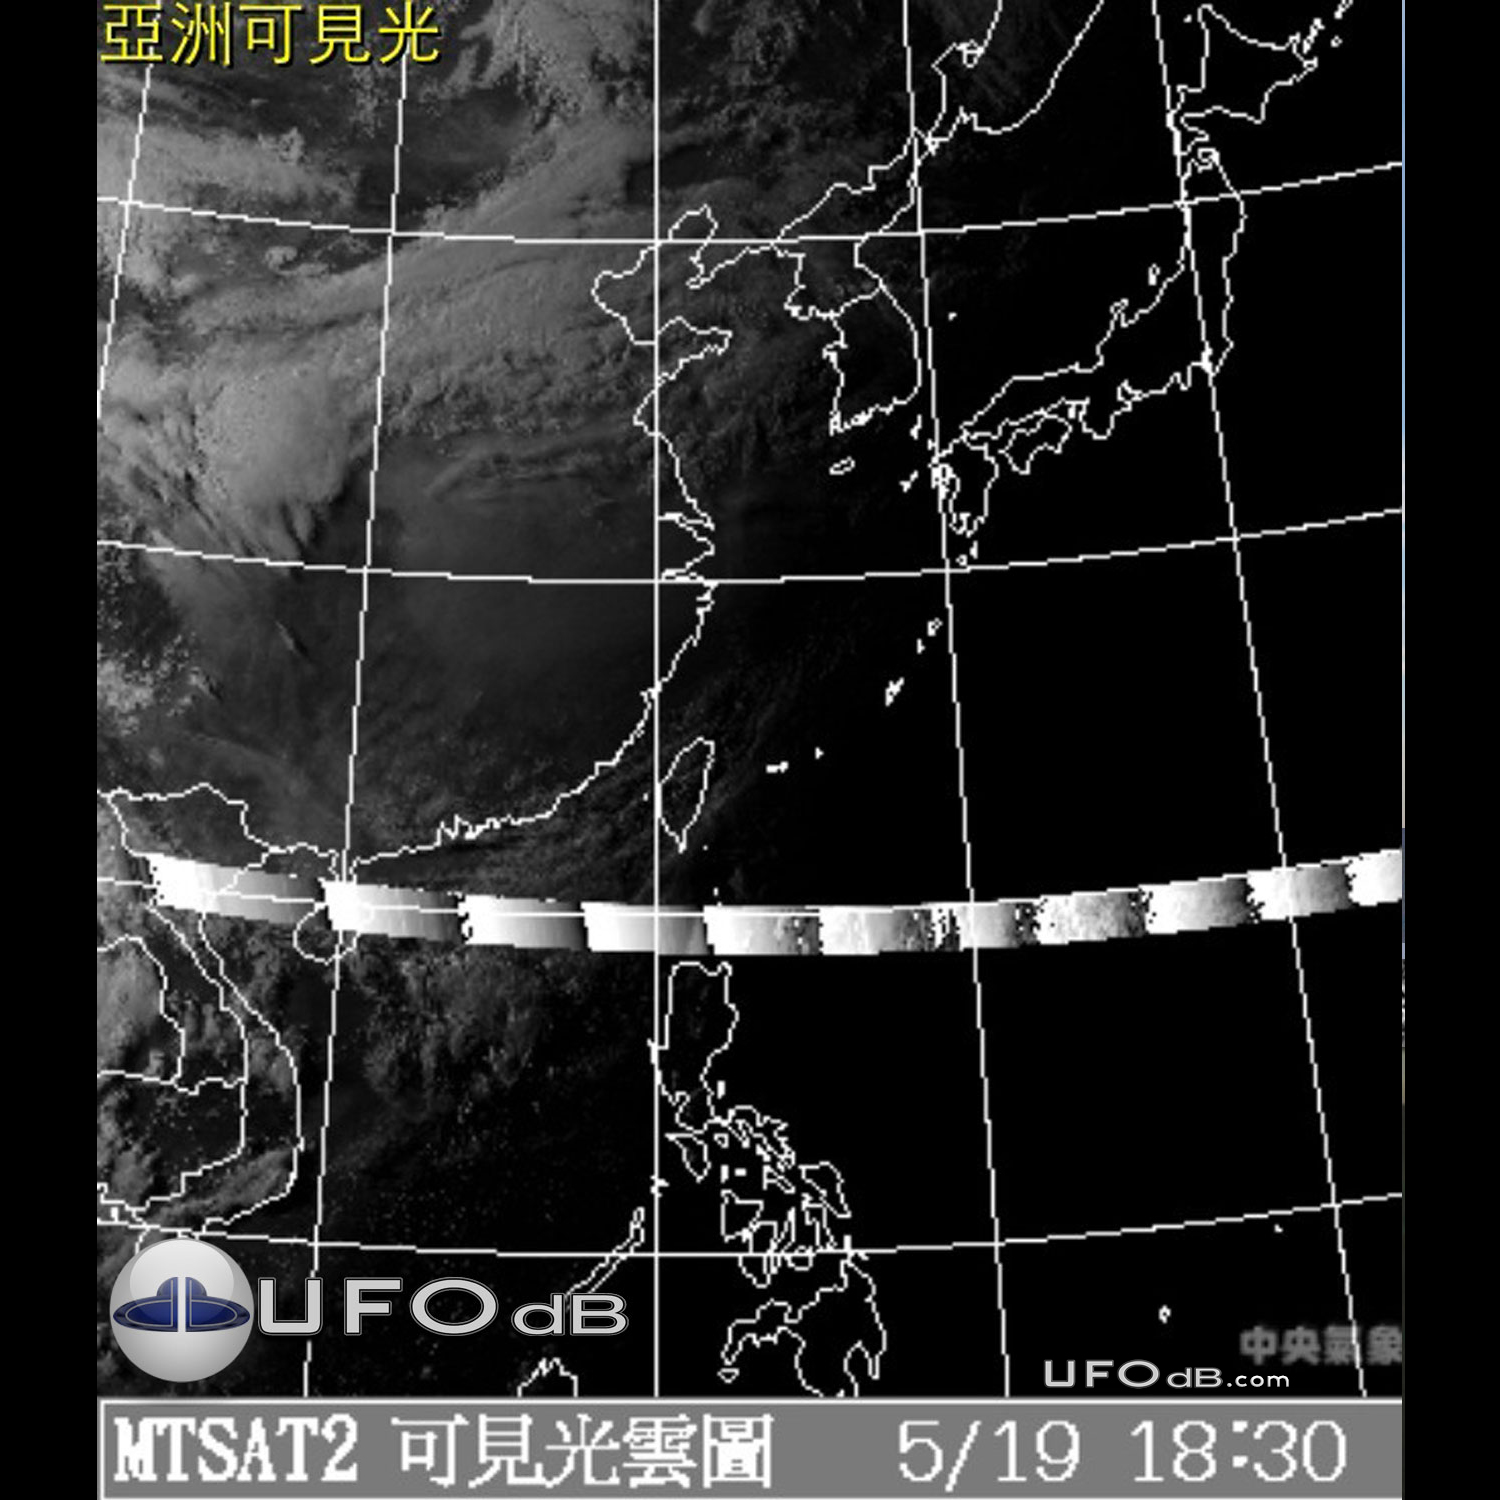 Satellite catches UFOs passing over the south of Taiwan | May 19 2011 UFO Picture #308-1